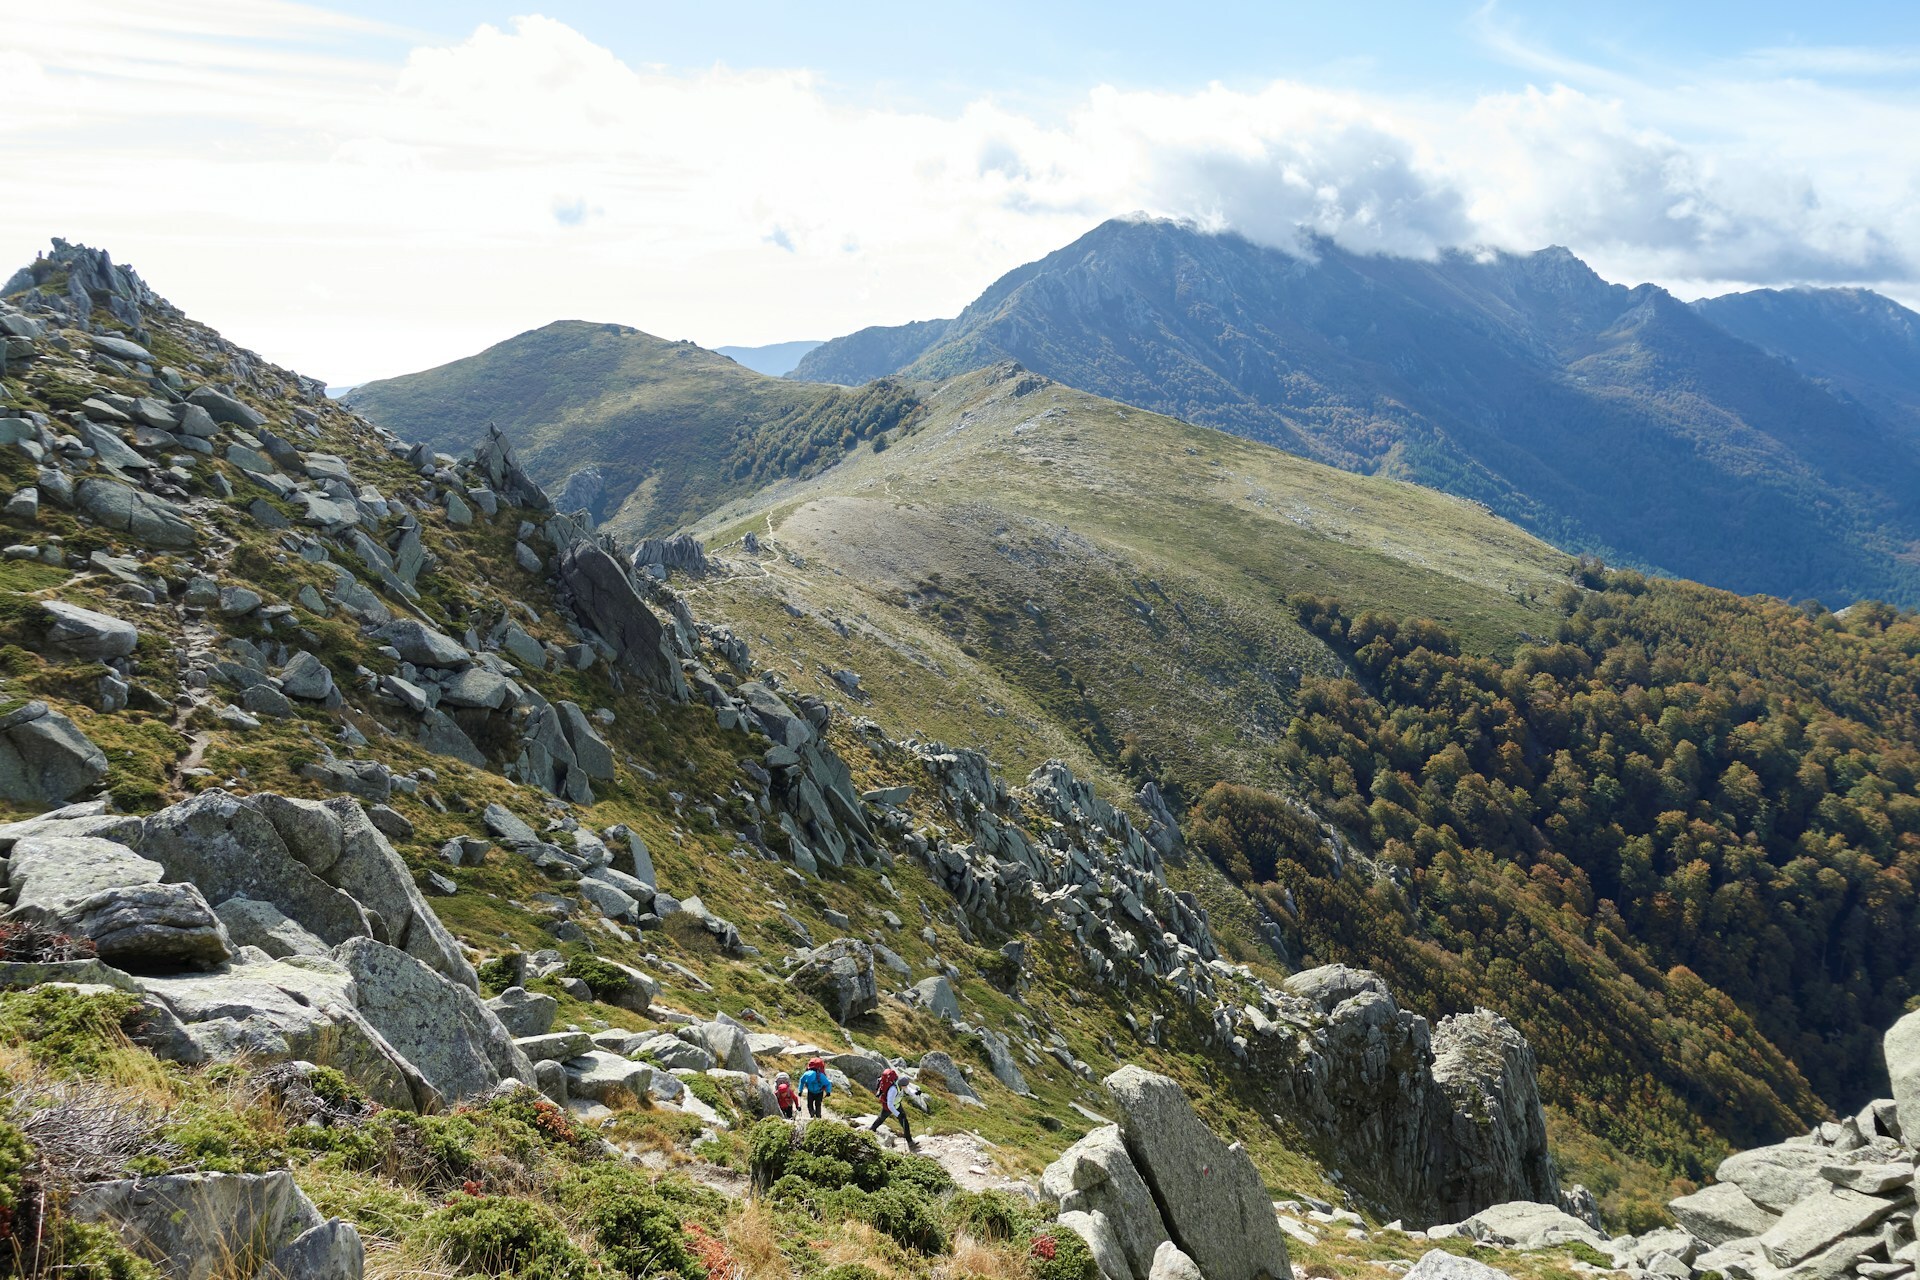 Hiking the Corsica GR 20: What you need to know